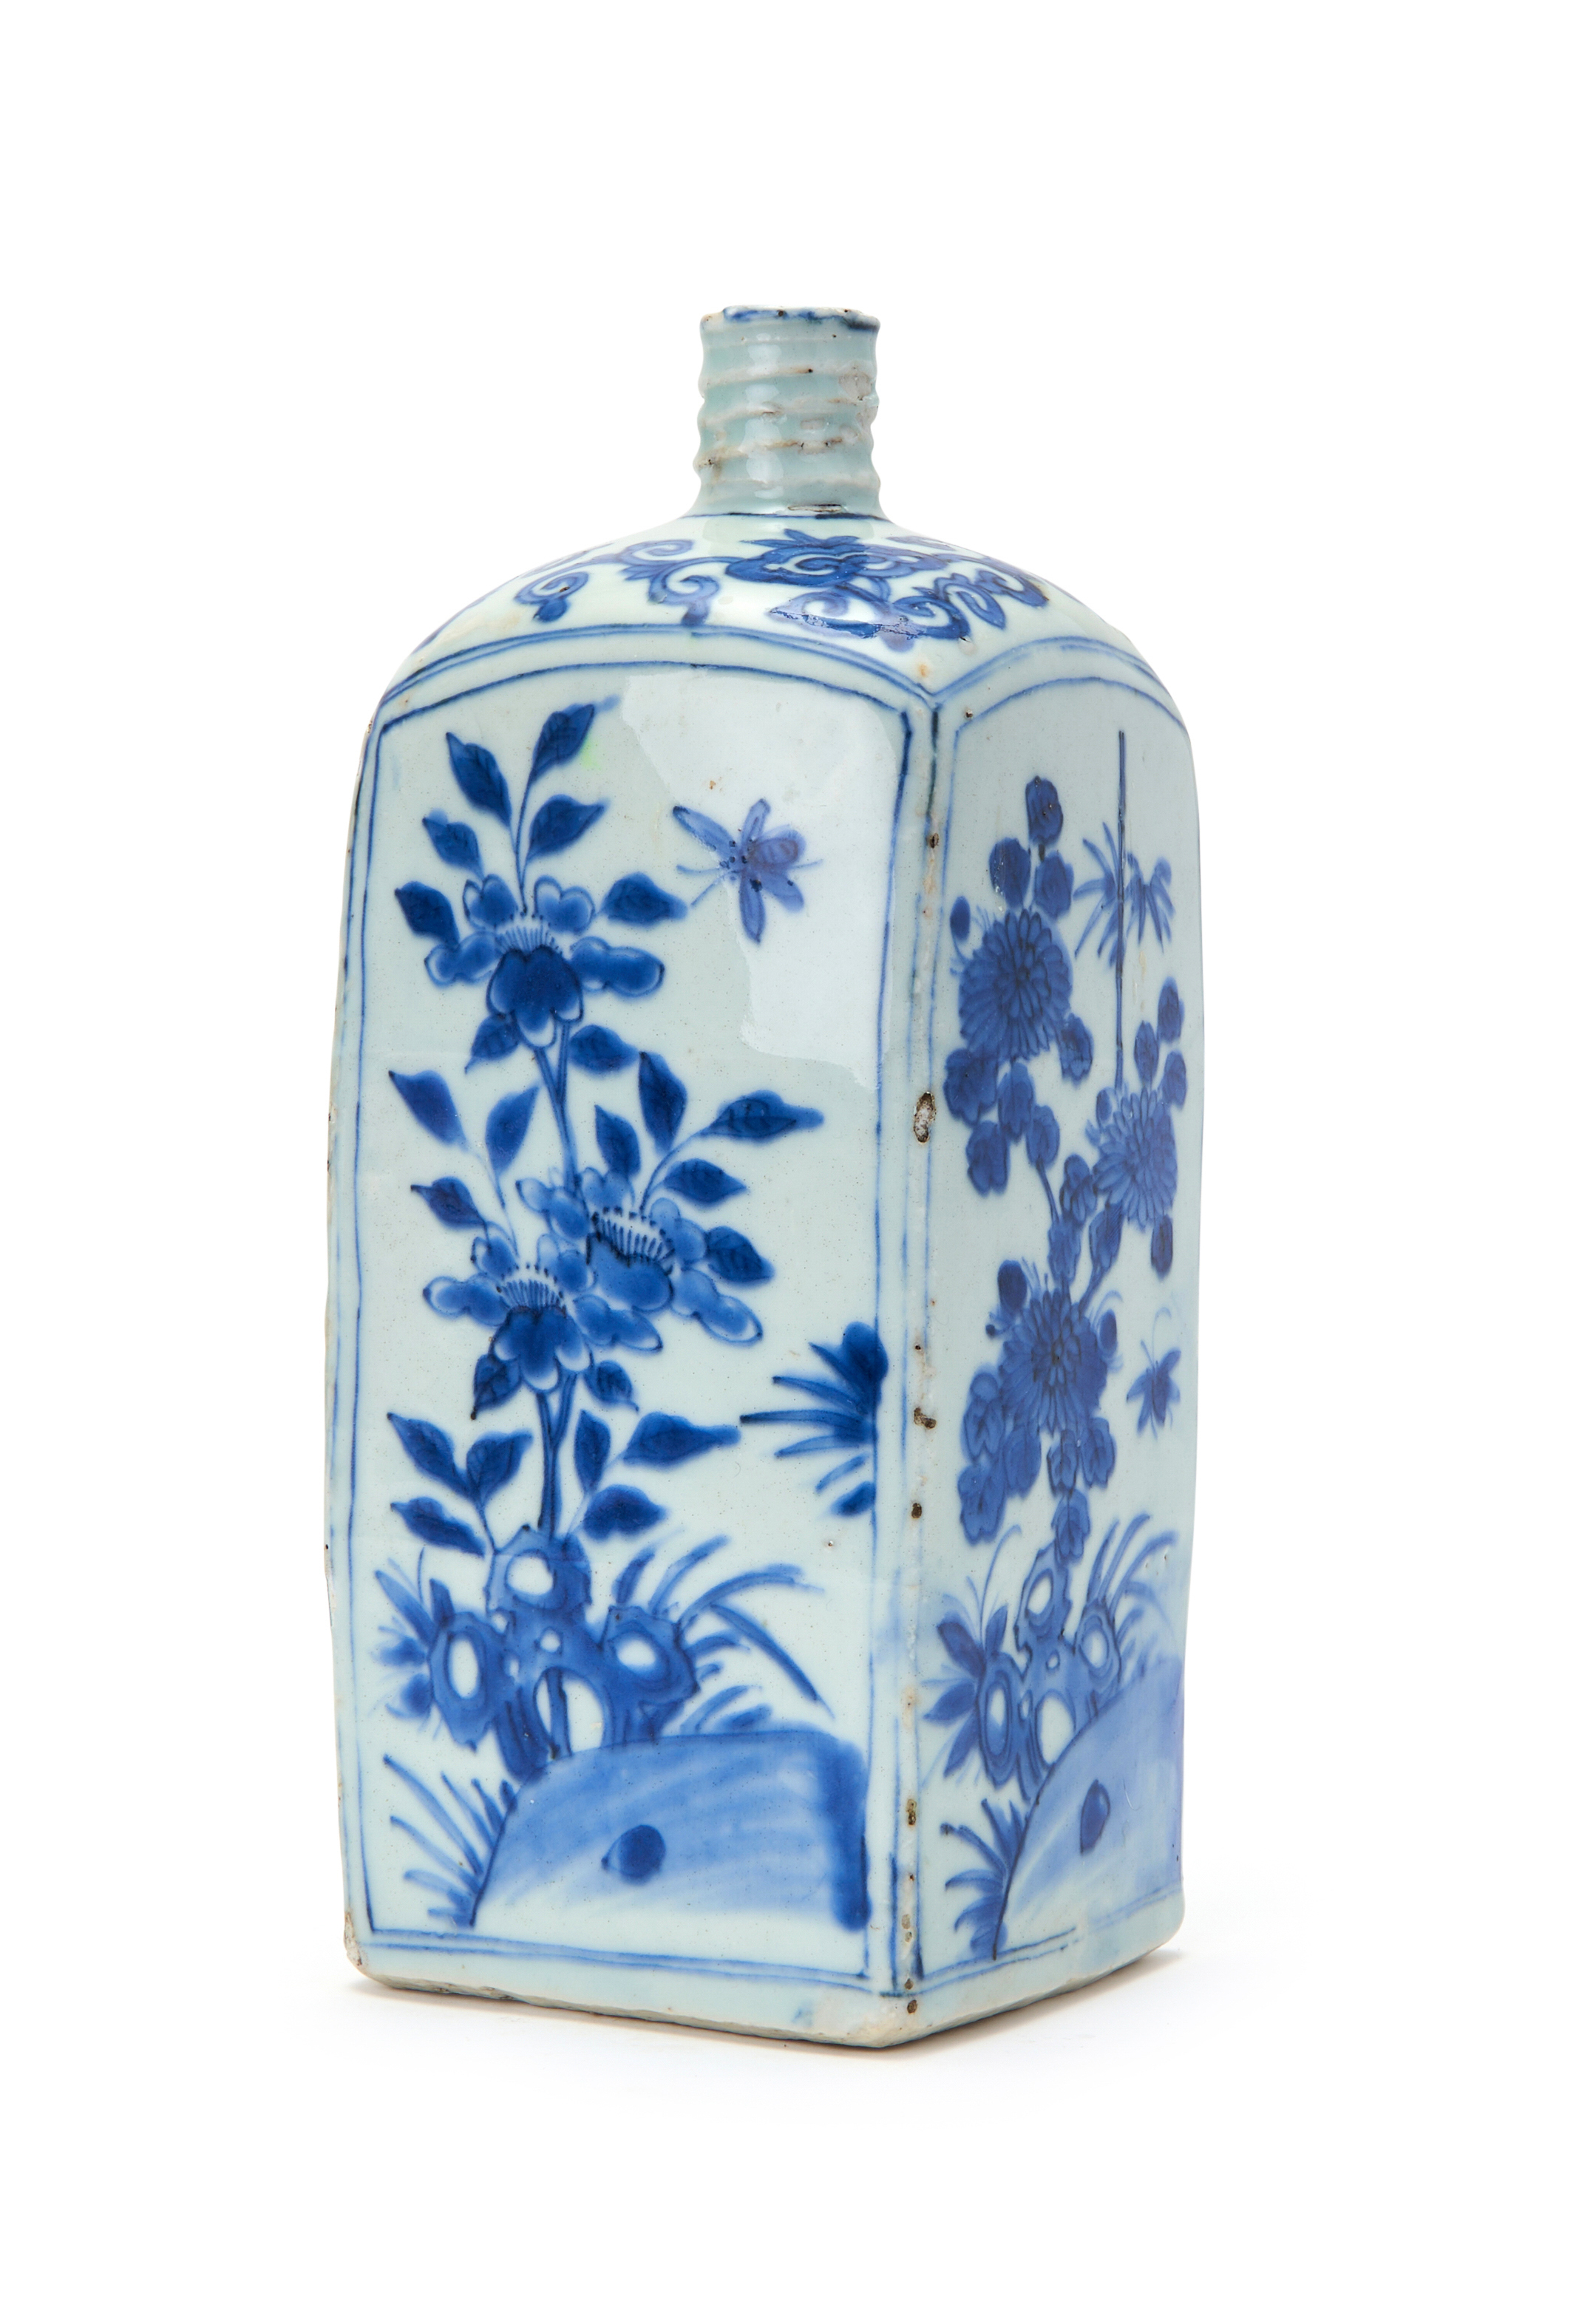 A CHINESE BLUE & WHITE BOTTLE VASE, TRANSITIONAL/KANGXI PERIOD, 17TH CENTURY, QING DYNASTY - Image 2 of 4